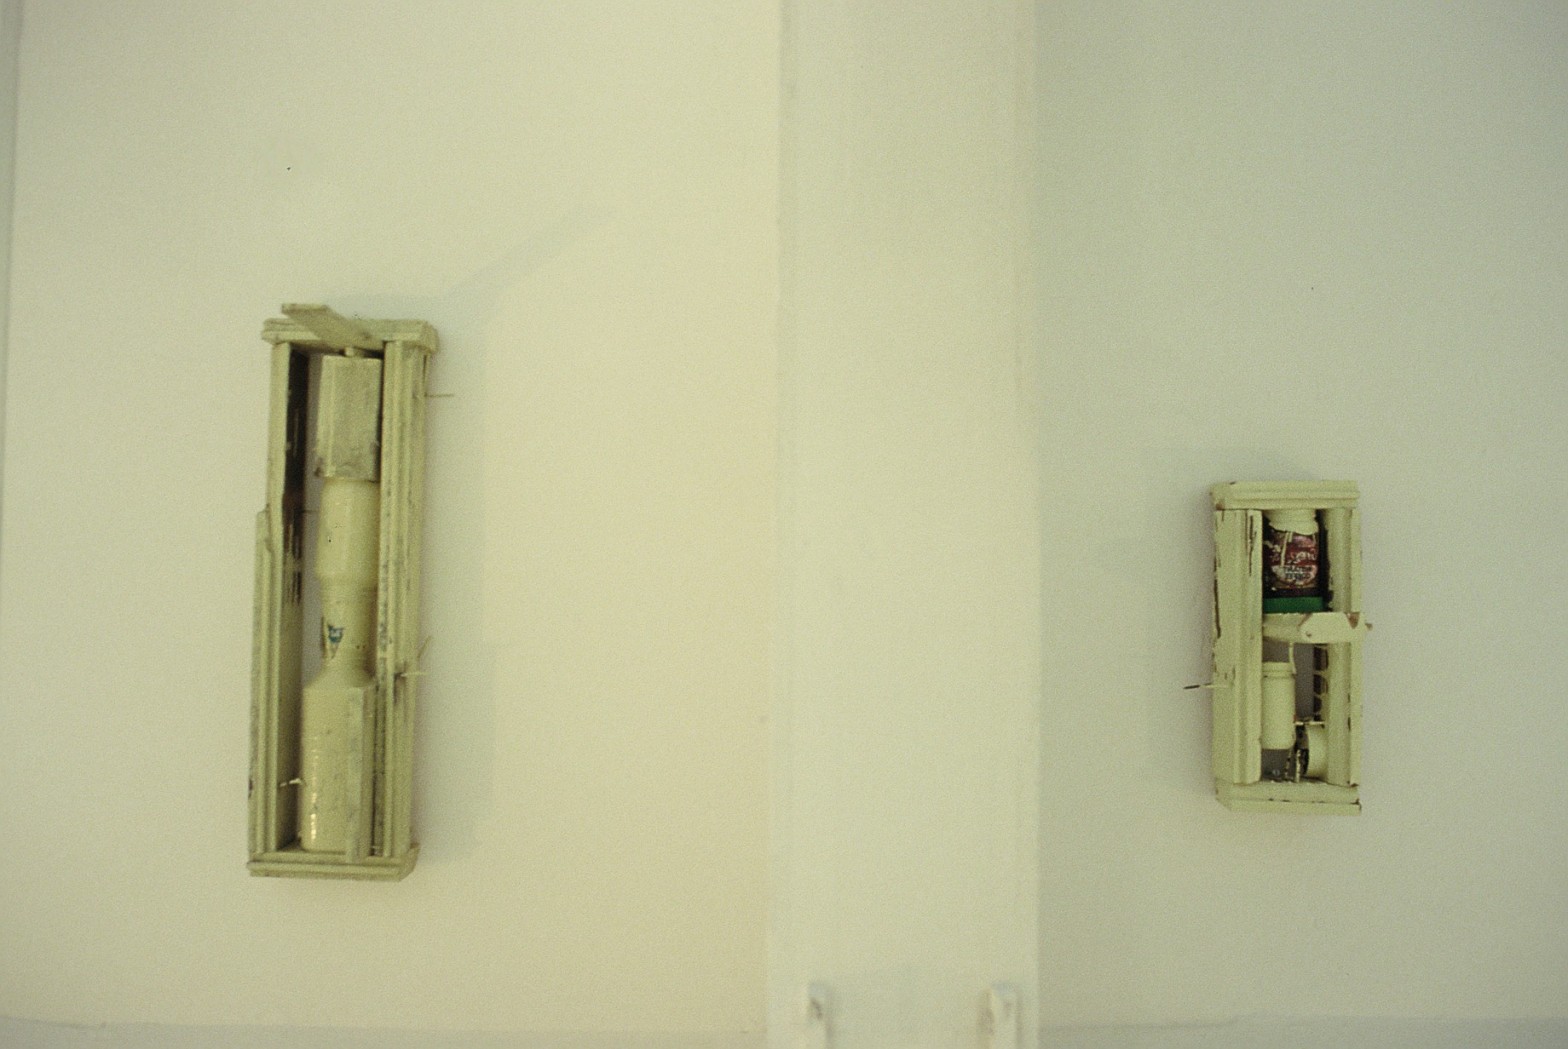 <p>Grant Lingard, S<em>tate House Yellow (1 &amp; 2)</em>, 1985, exhibited in <em>Skeletons</em> (June 1985), James Paul Gallery, Christchurch (installation detail). Image courtesy of the Grant Lingard Archive</p>